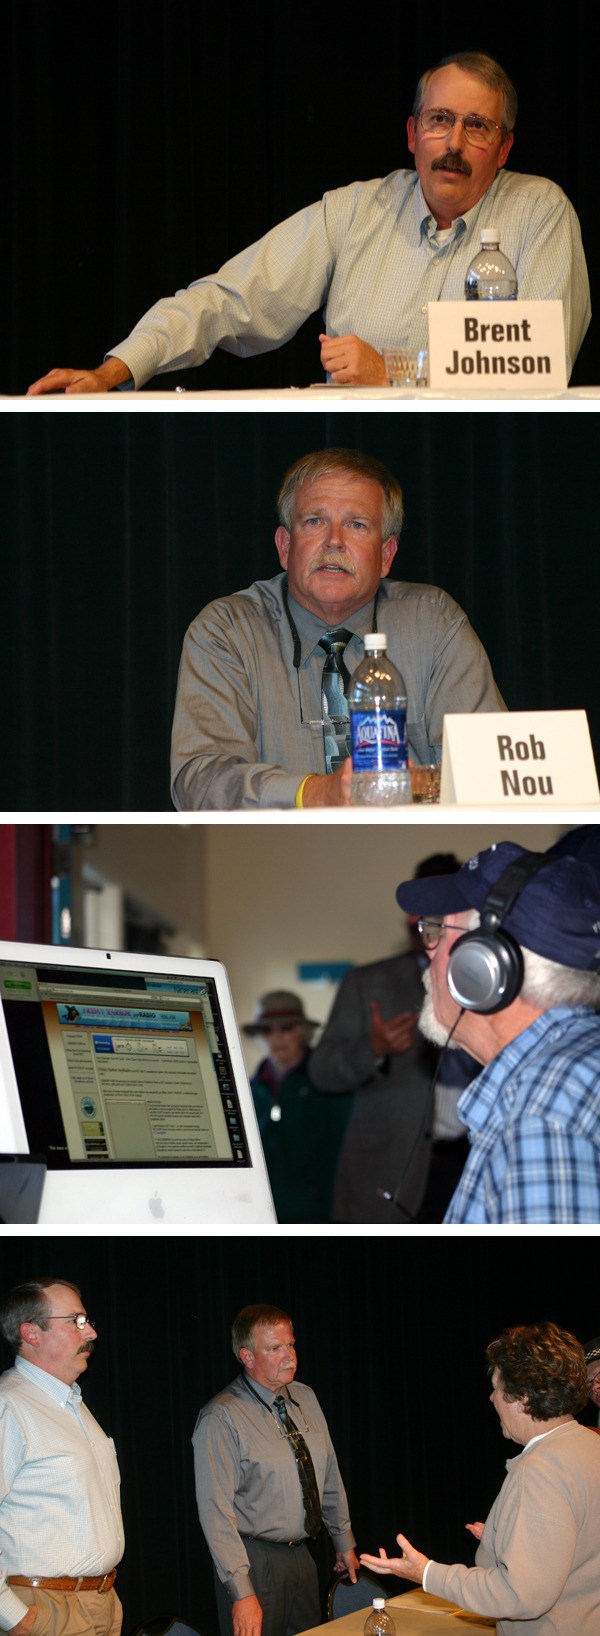 About 100 people attended the Sheriff Candidates Forum Sept. 28 in the San Juan Community Theatre's Gubelman Theatre. Top photo: Candidate Brent Johnson. Second photo: Candidate Rob Nou. Third photo: Ken Norris of Friday Harbor tinyRadio 1650 AM broadcasts the event live. Bottom photo: Lori Stokes of Friday Harbor meets the candidates after the forum.